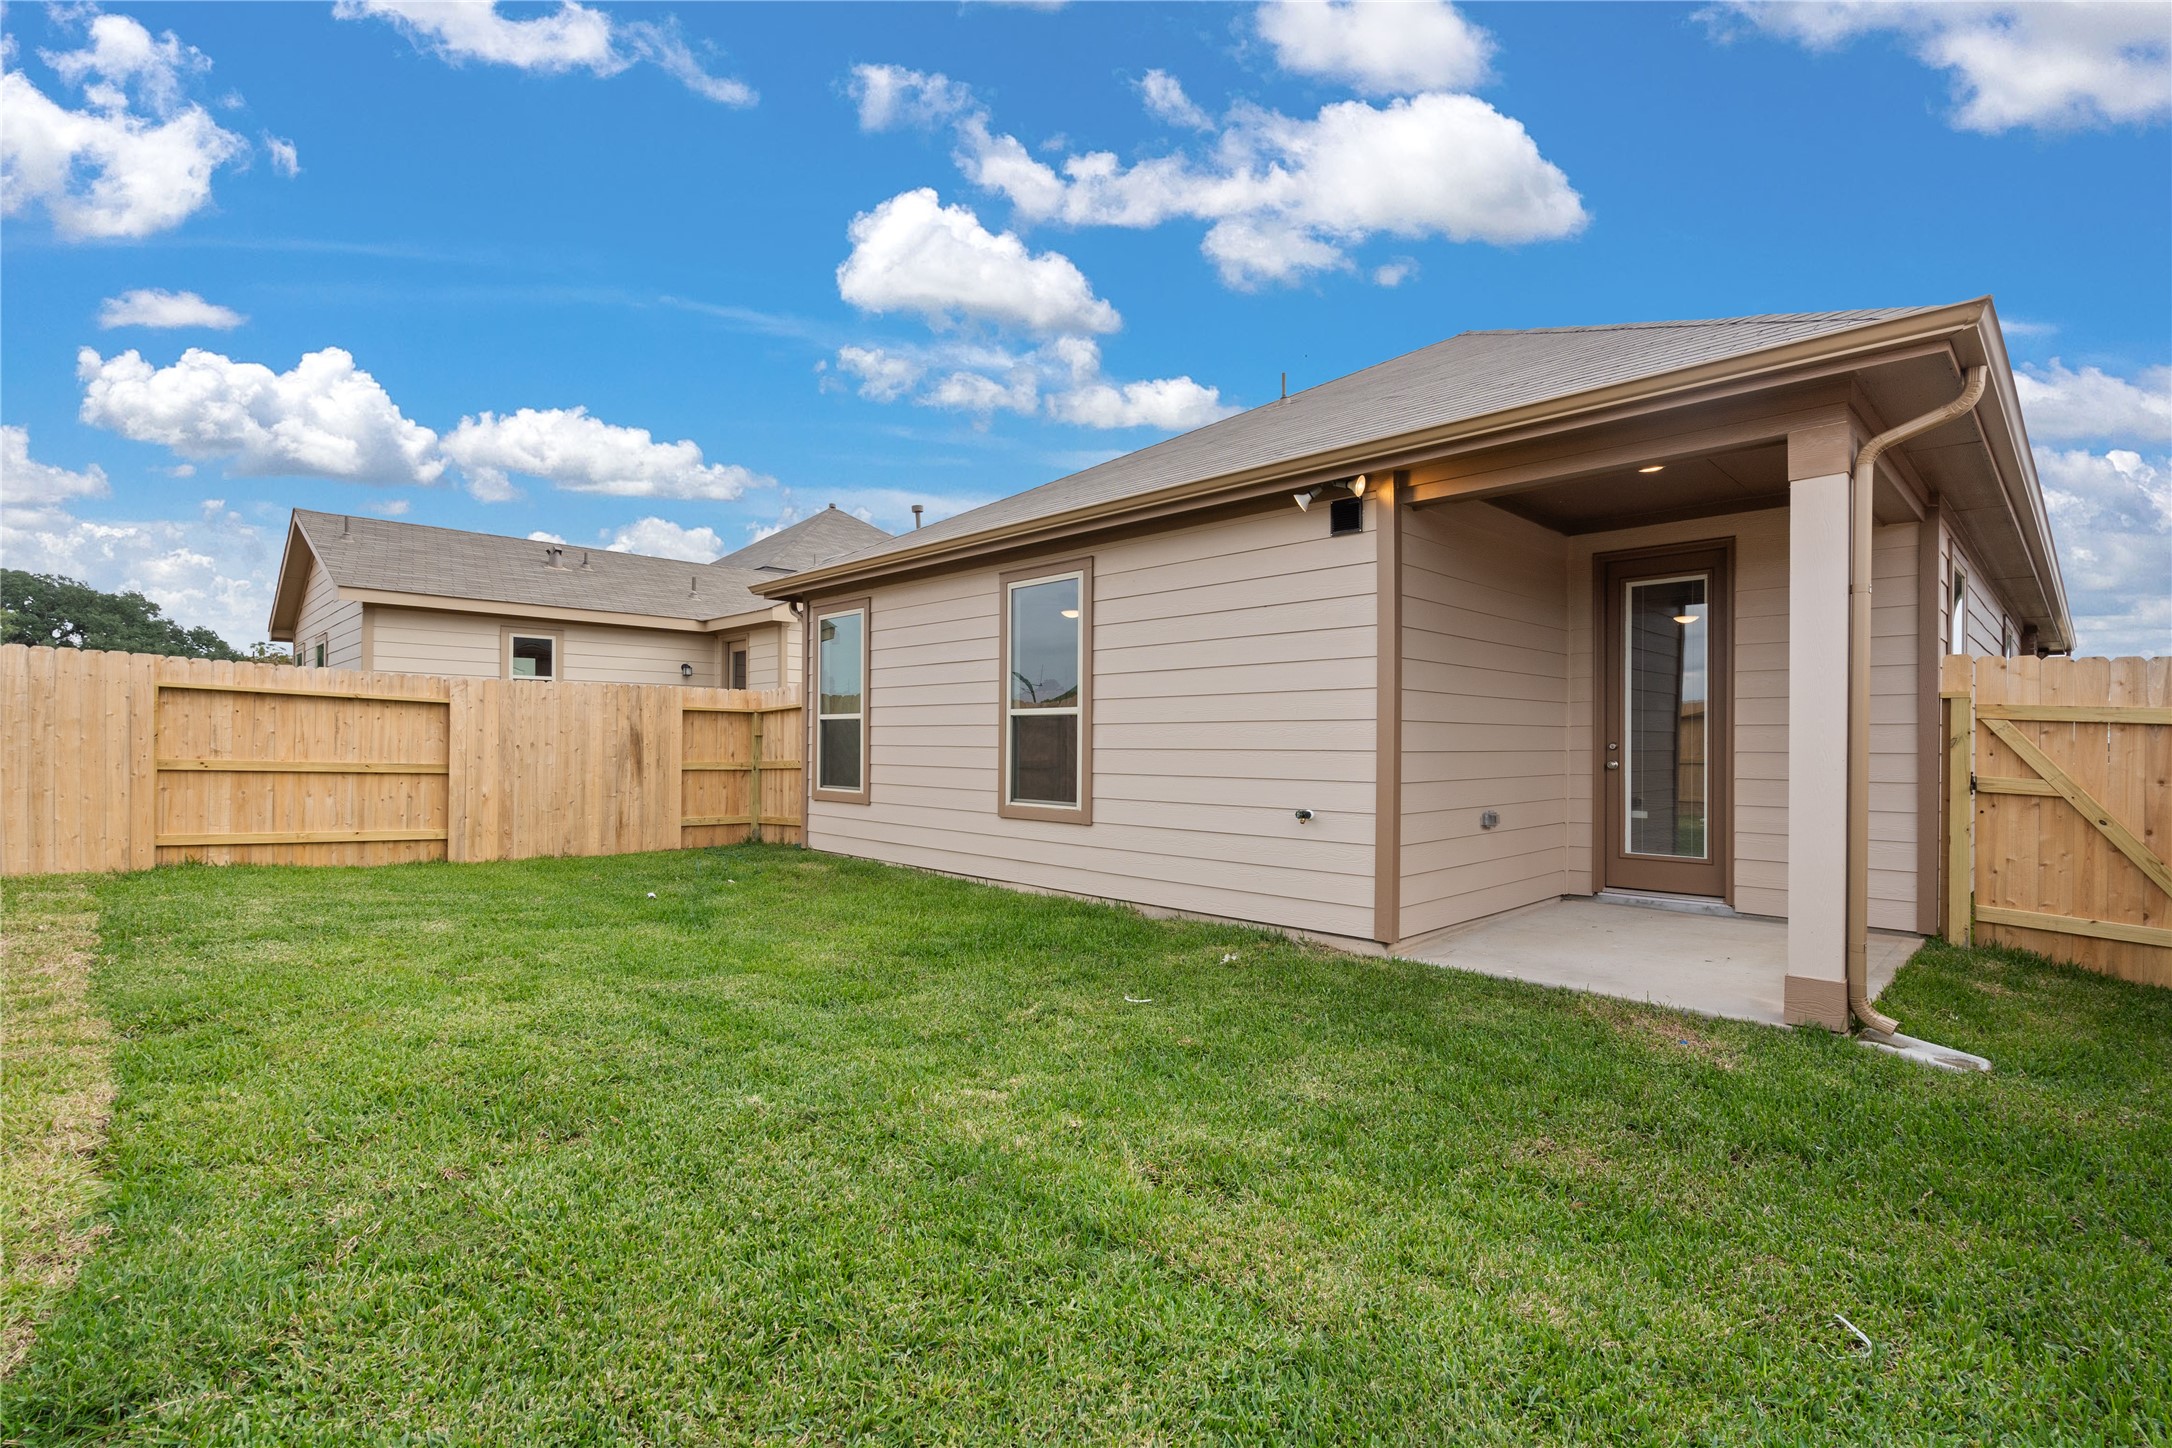 Come and see this spacious backyard with its beautiful covered patio. There is plenty of room for the kids to play and adults to relax! Perfect for your outdoor living space, patio furniture, bbq pit, and so much more. The possibilities are endless!